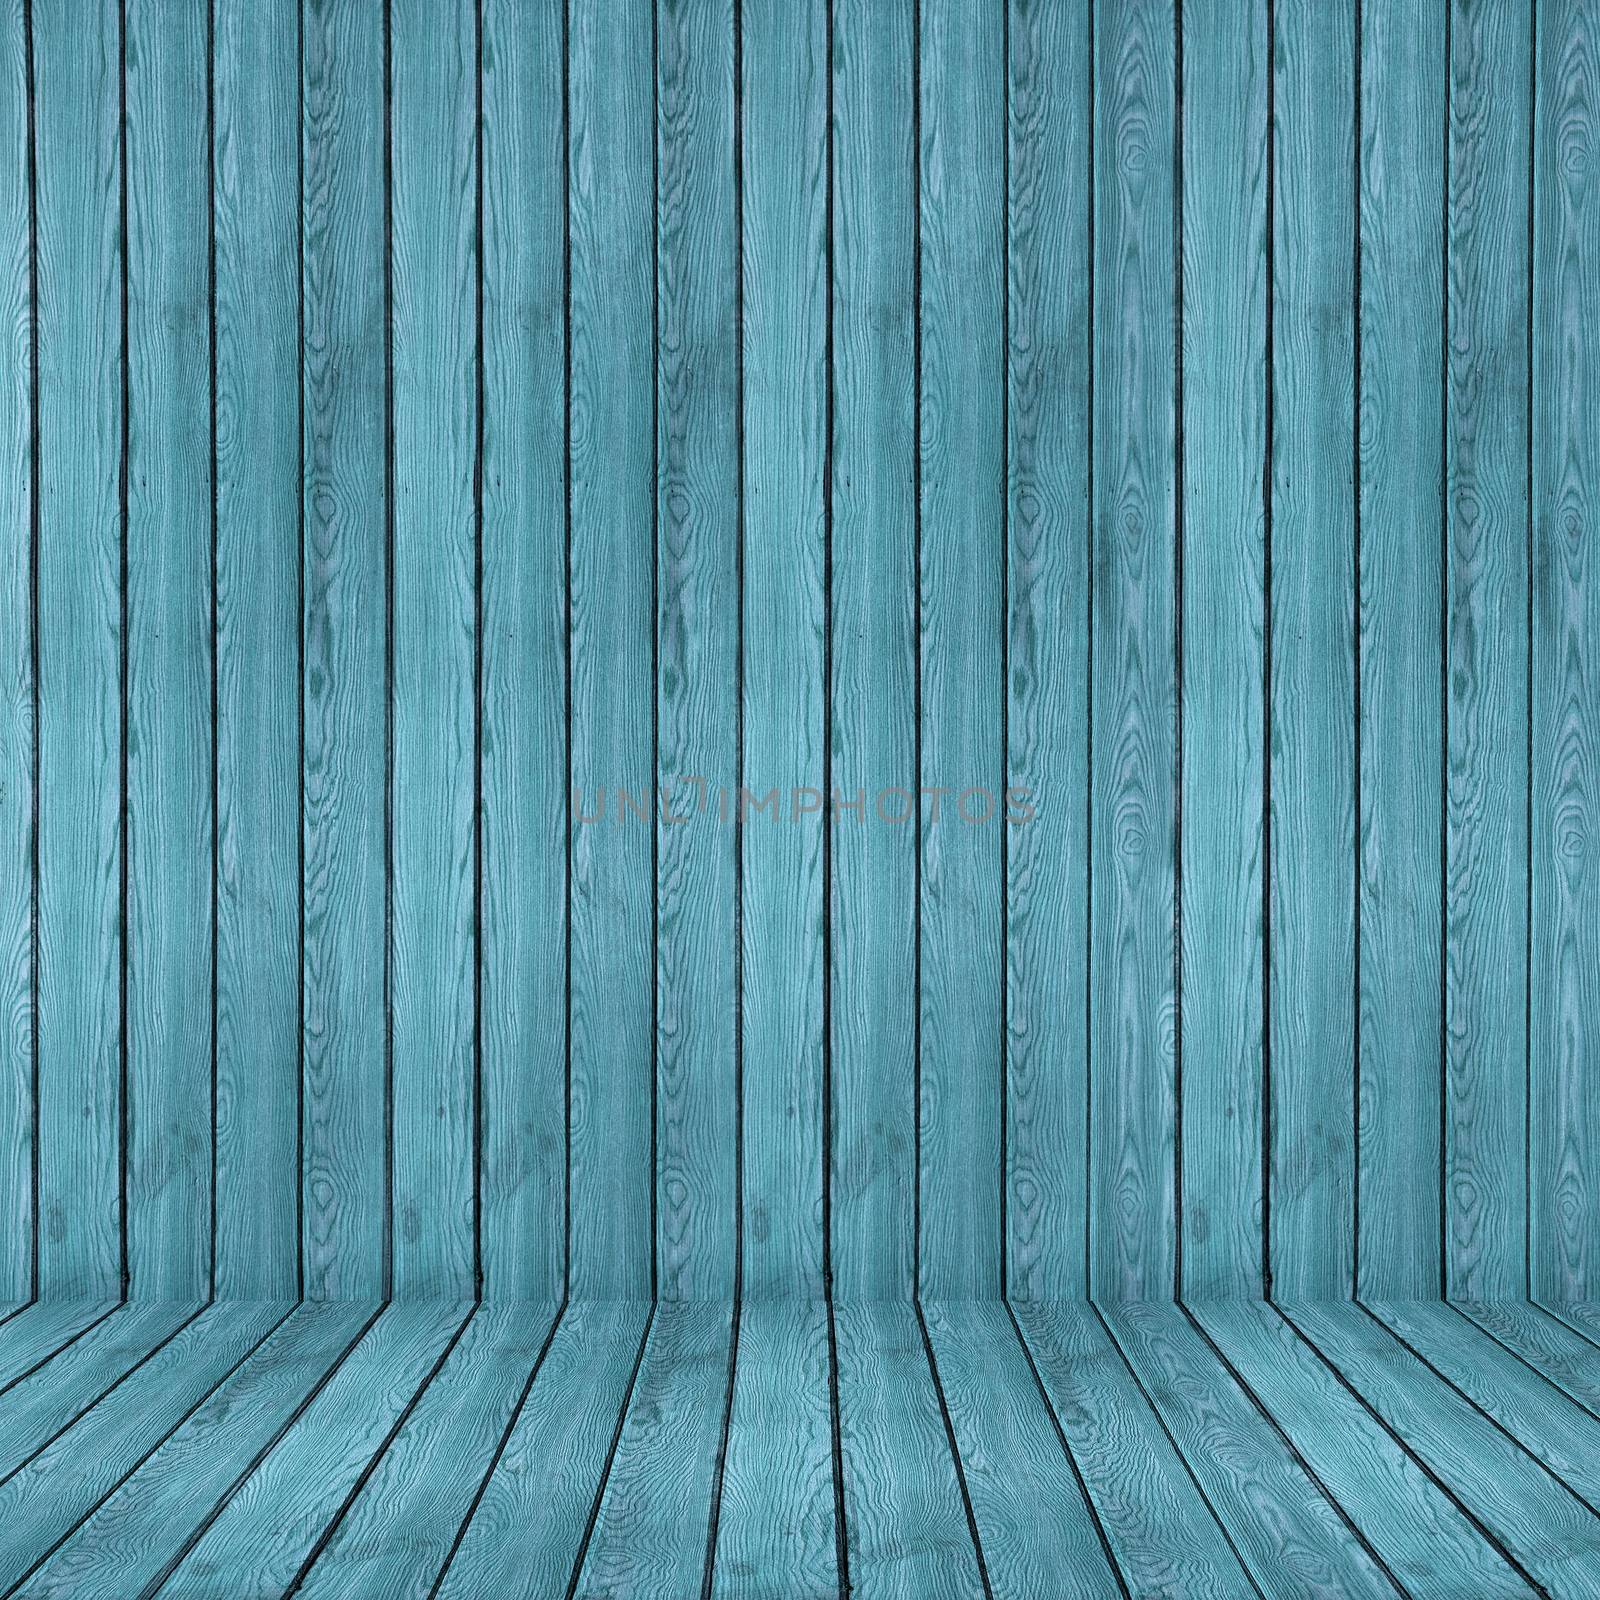 Wood texture background. blue wood wall and floor by ivo_13